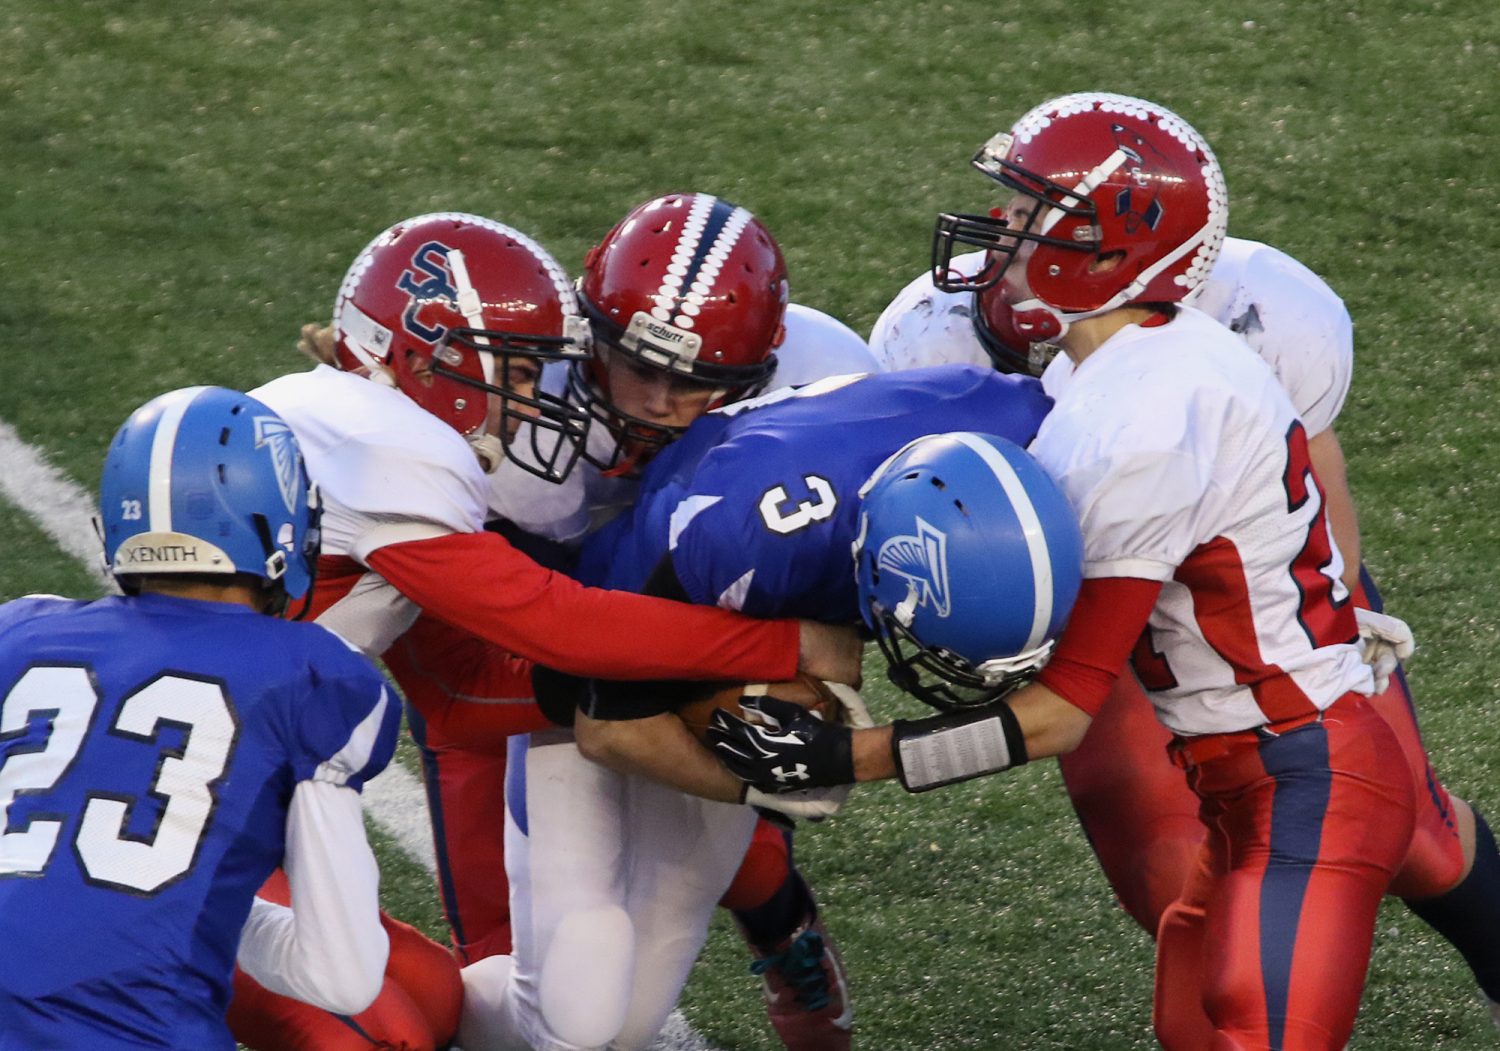 Spencer/Columbus defenders gang tackle Amherst’s Joshua Cisewski as the Rockets lost to Amherst 42-0 in the WIAA Division 5 State Championship Game at Camp Randall Stadium in Madison, Thursday, Nov. 19, 2015.